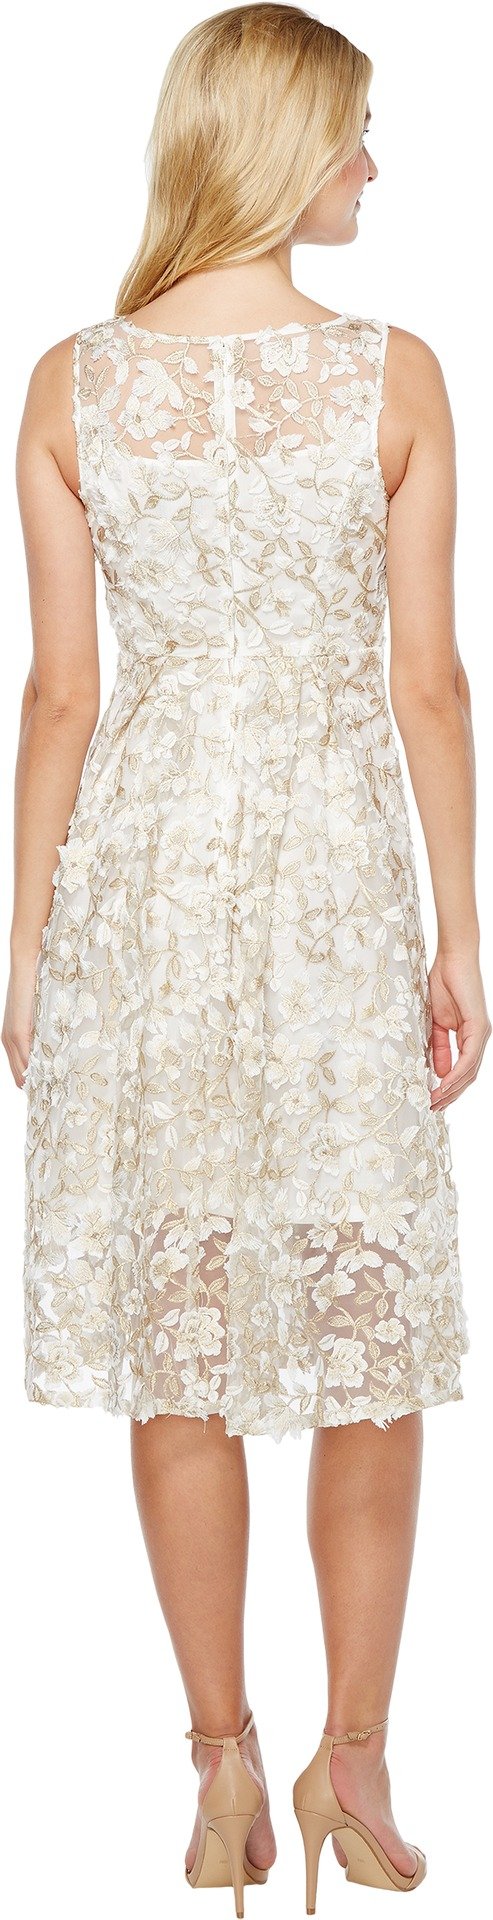 Adrianna Papell Women's One Size 3D Embroidery Fit and Flare Dress